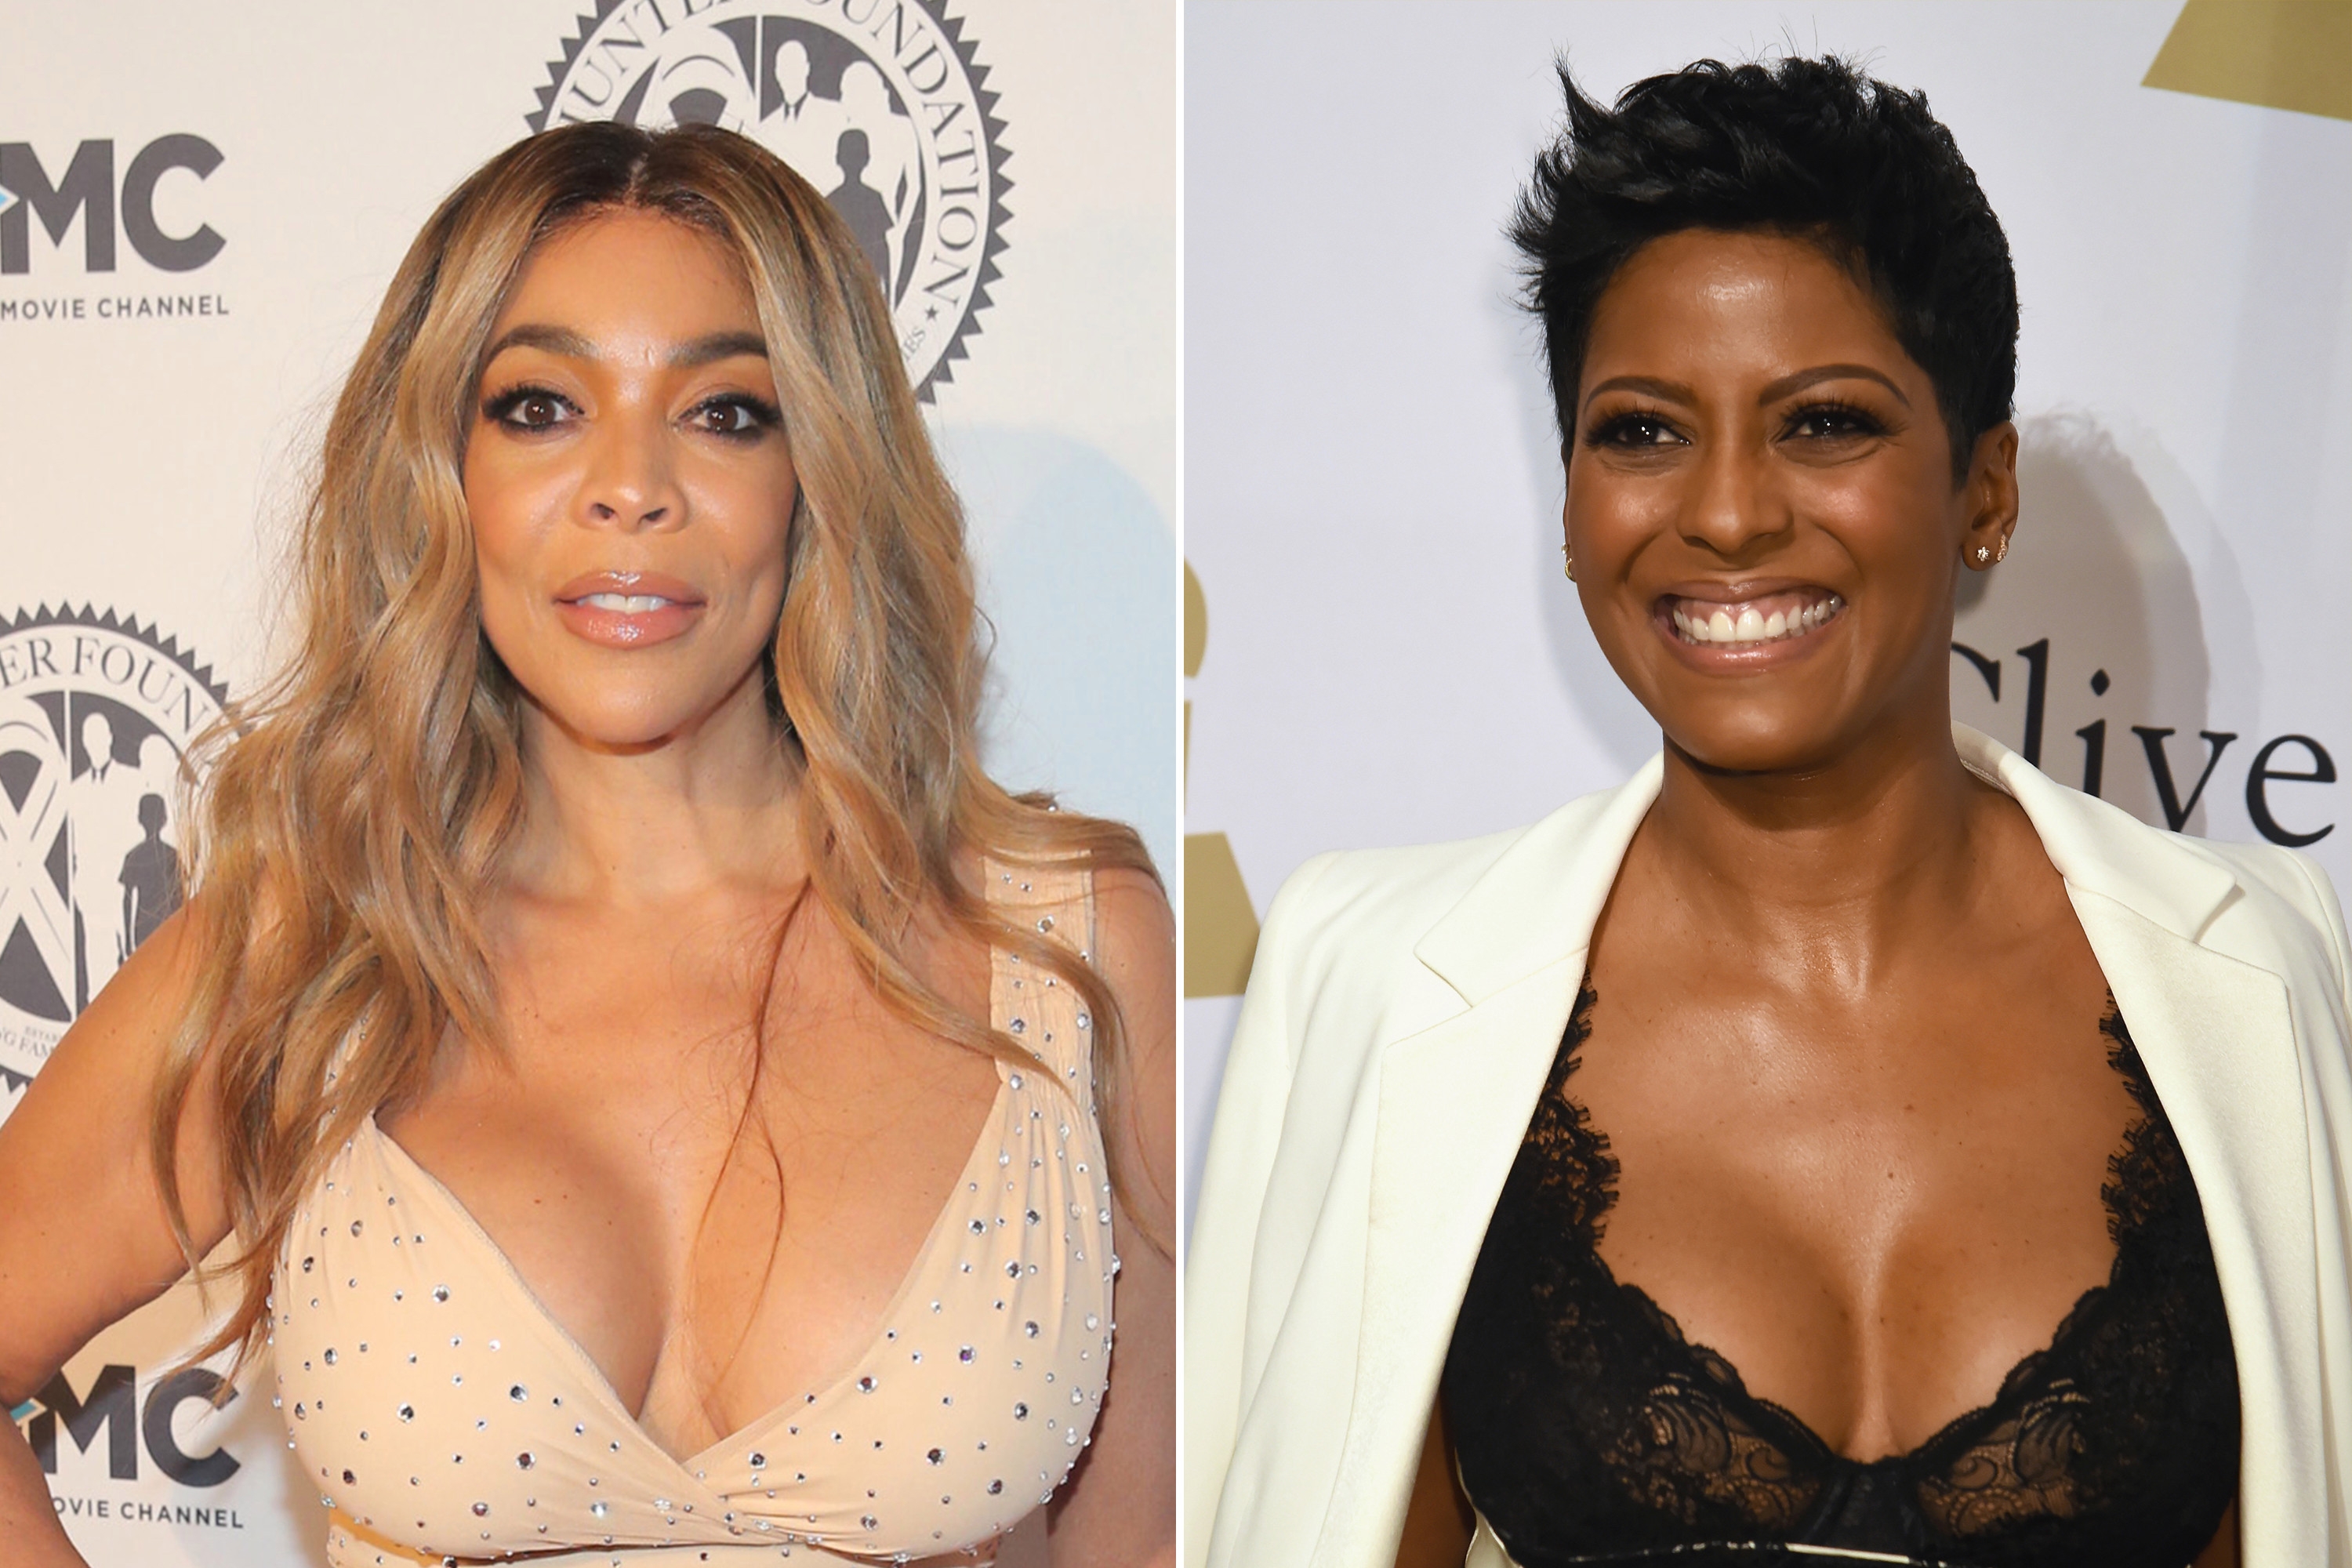 ‘Wendy Williams Show’ producer leaving for Tamron Hall’s show